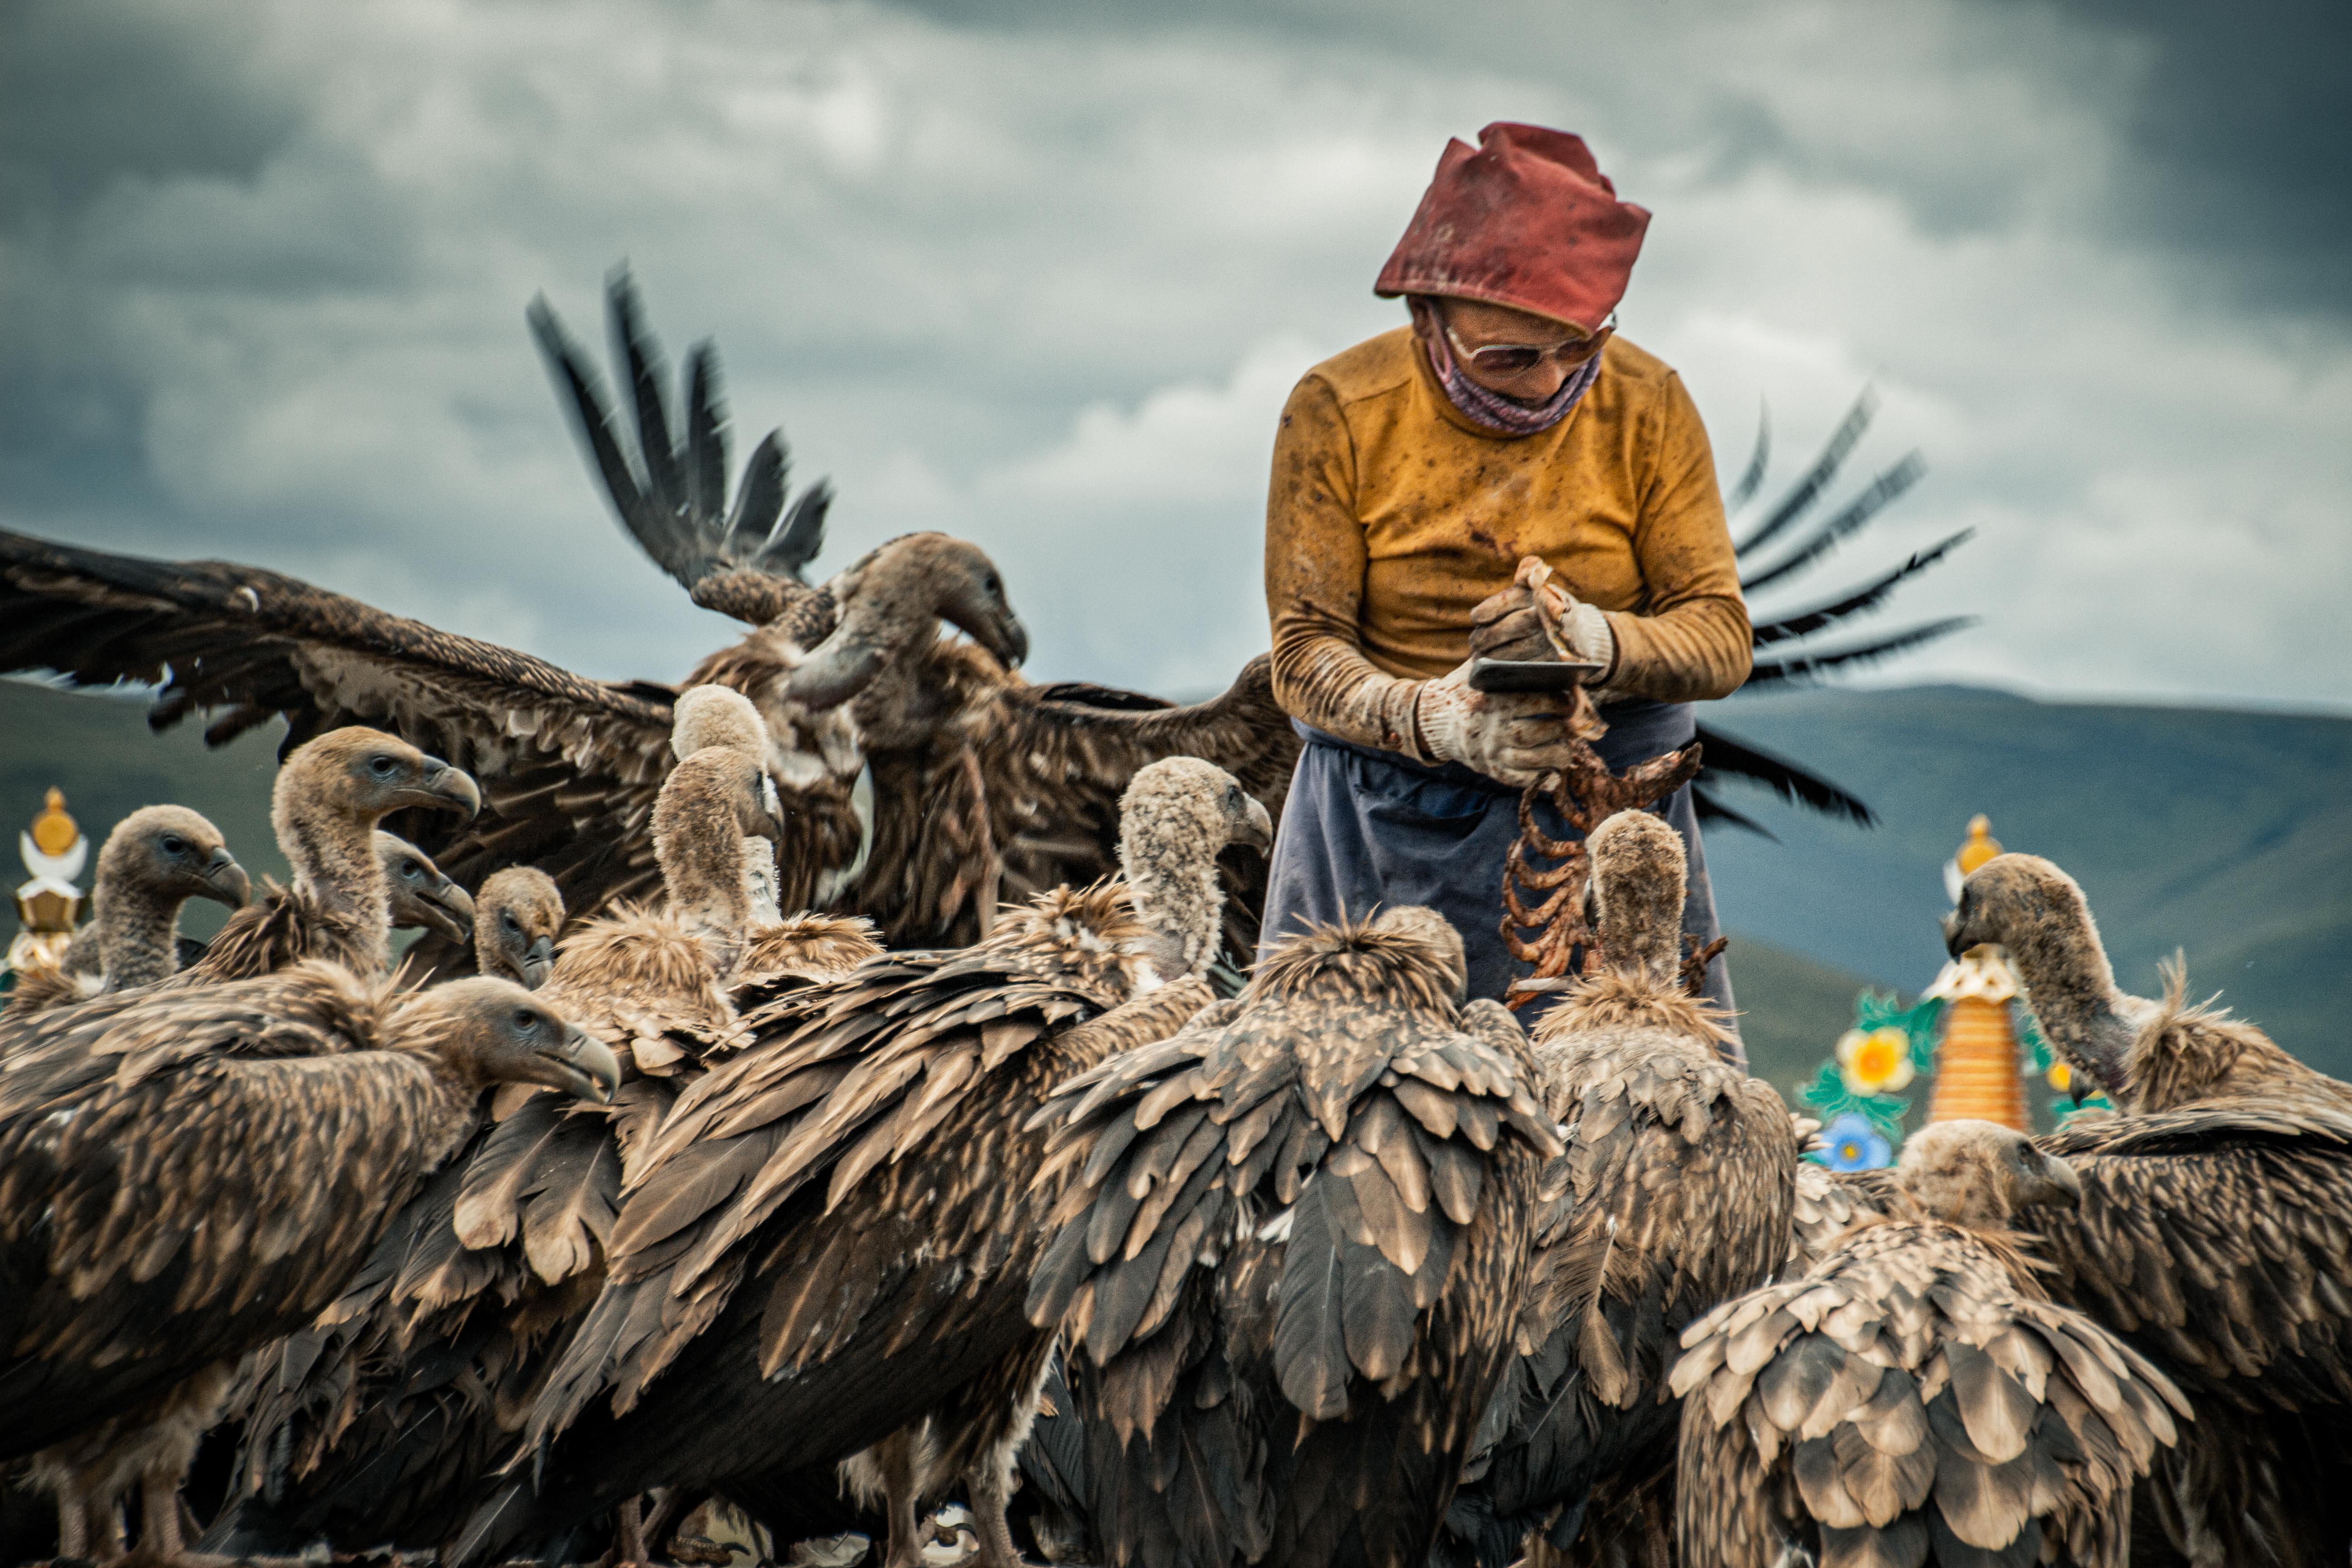 Tibetan custom offers human corpses to Himalayan vultures, second largest scavenger on Earth. For the ritual, a monk tries a butcher’s apron and prepares the body until the last bone disappears. The soul is free to ride the birds and reach the Sky with strength and compassion for all living being.